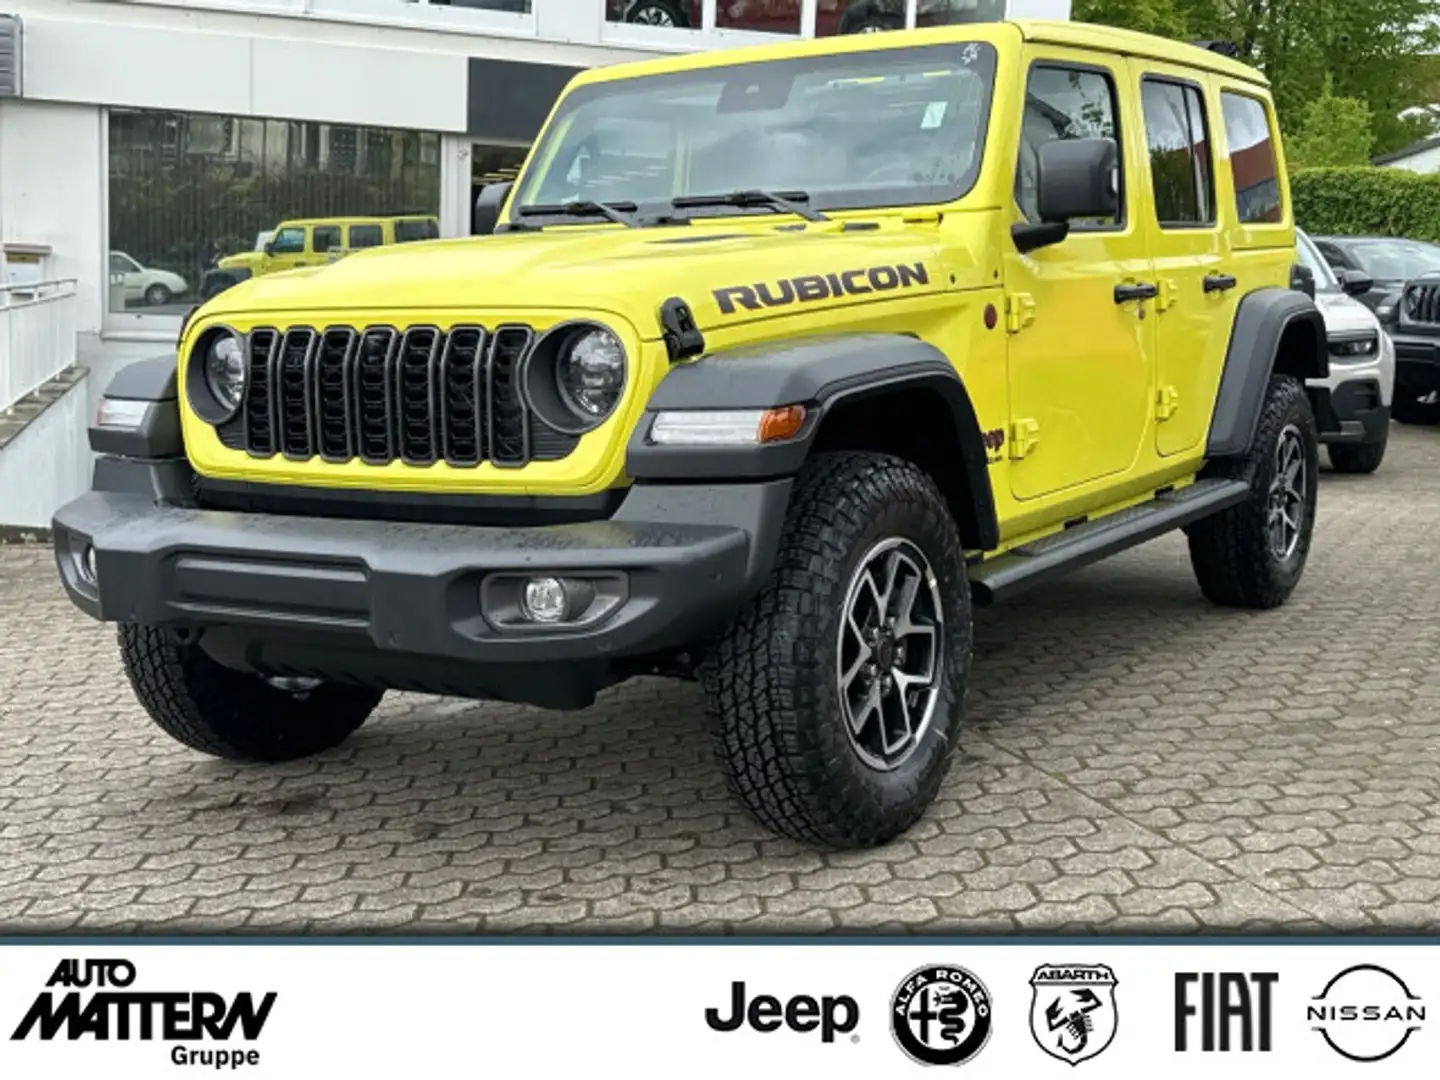 Jeep Wrangler Rubicon MY24 2,0l T-GDI 200kW 4x4 AT8 Yellow - 1